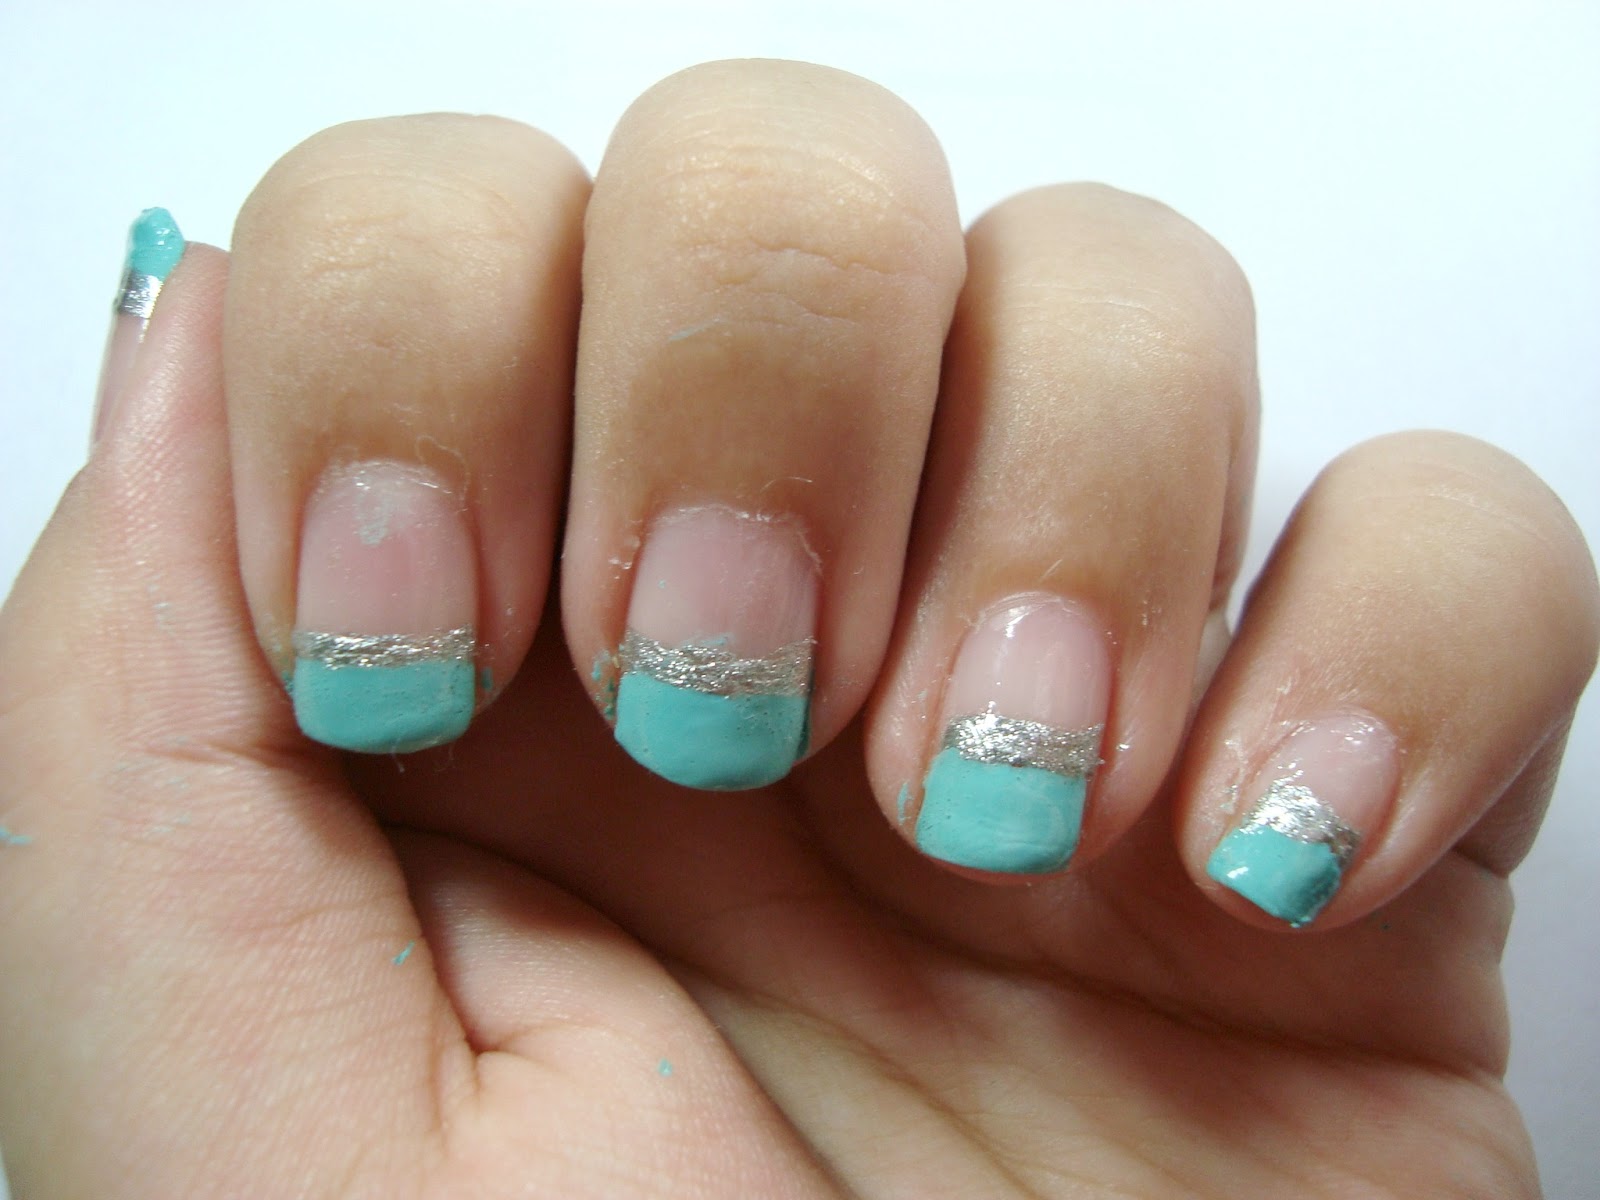 1. Tiffany Blue Nails on Tumblr - wide 7